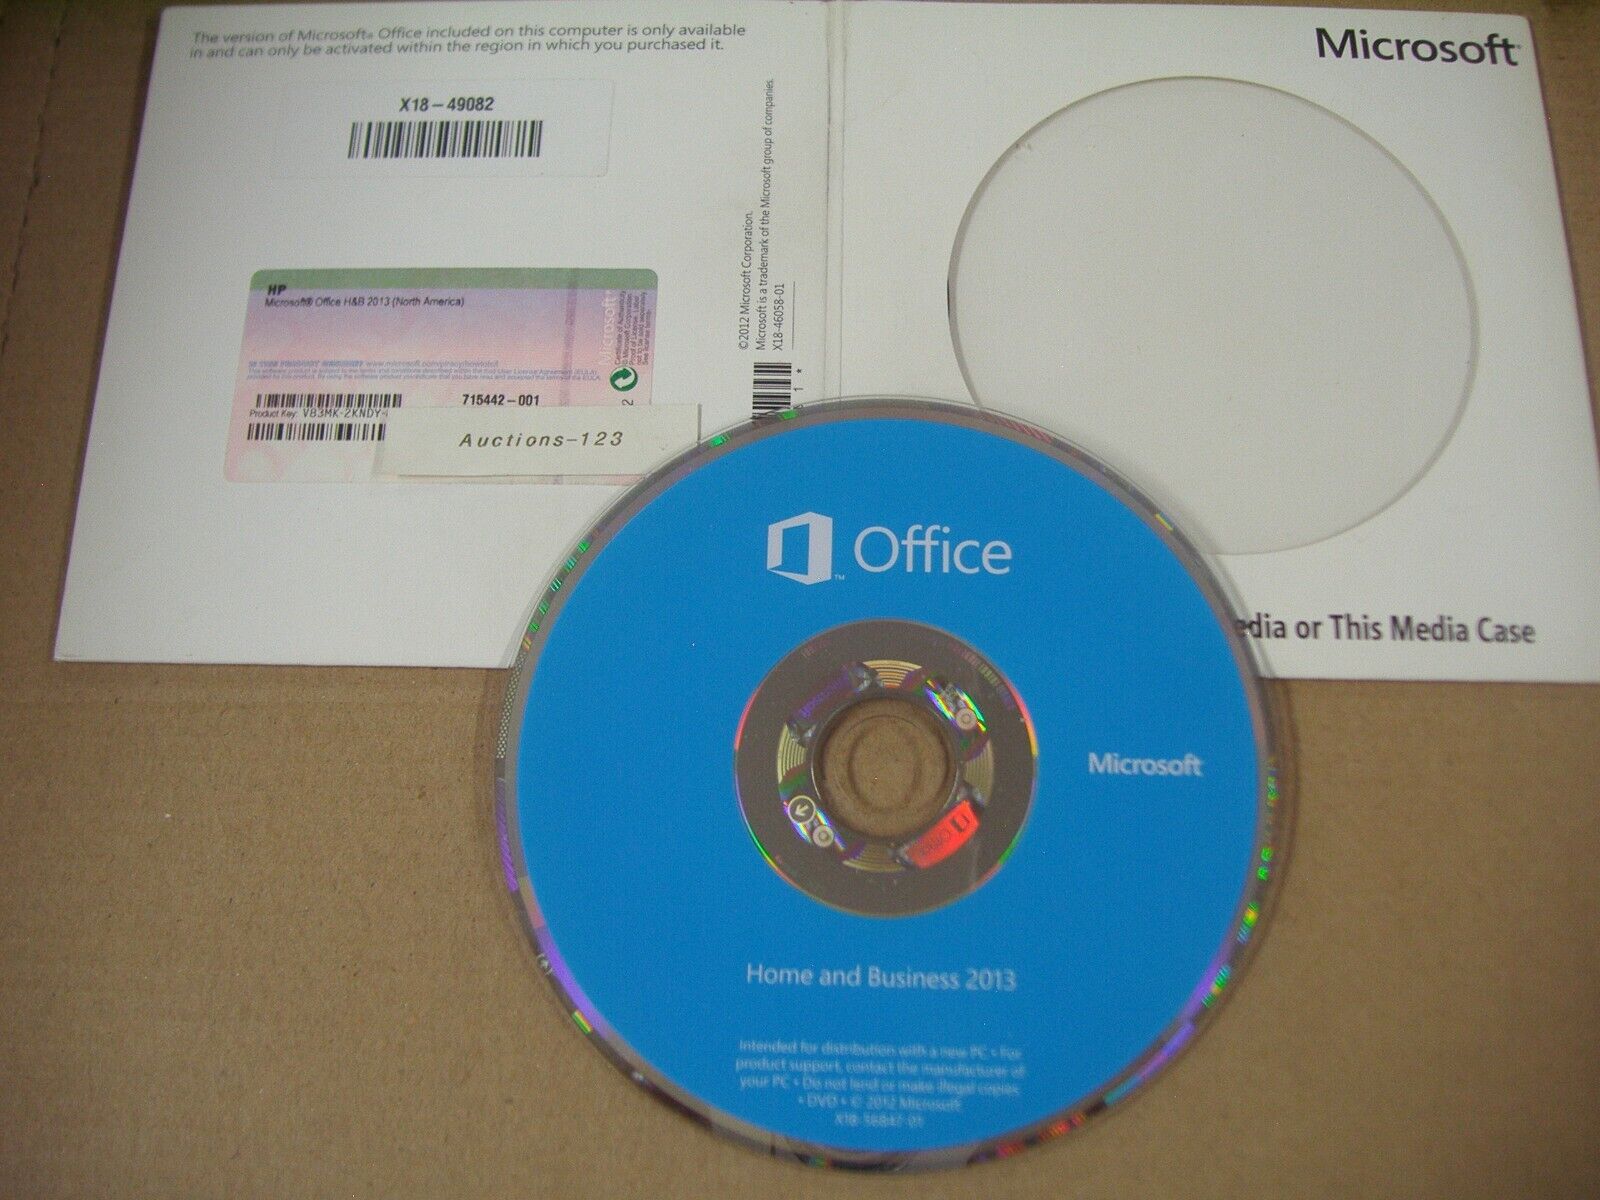 MS Microsoft Office 2013 Home and Business Full English Version DVD =BRAND NEW=